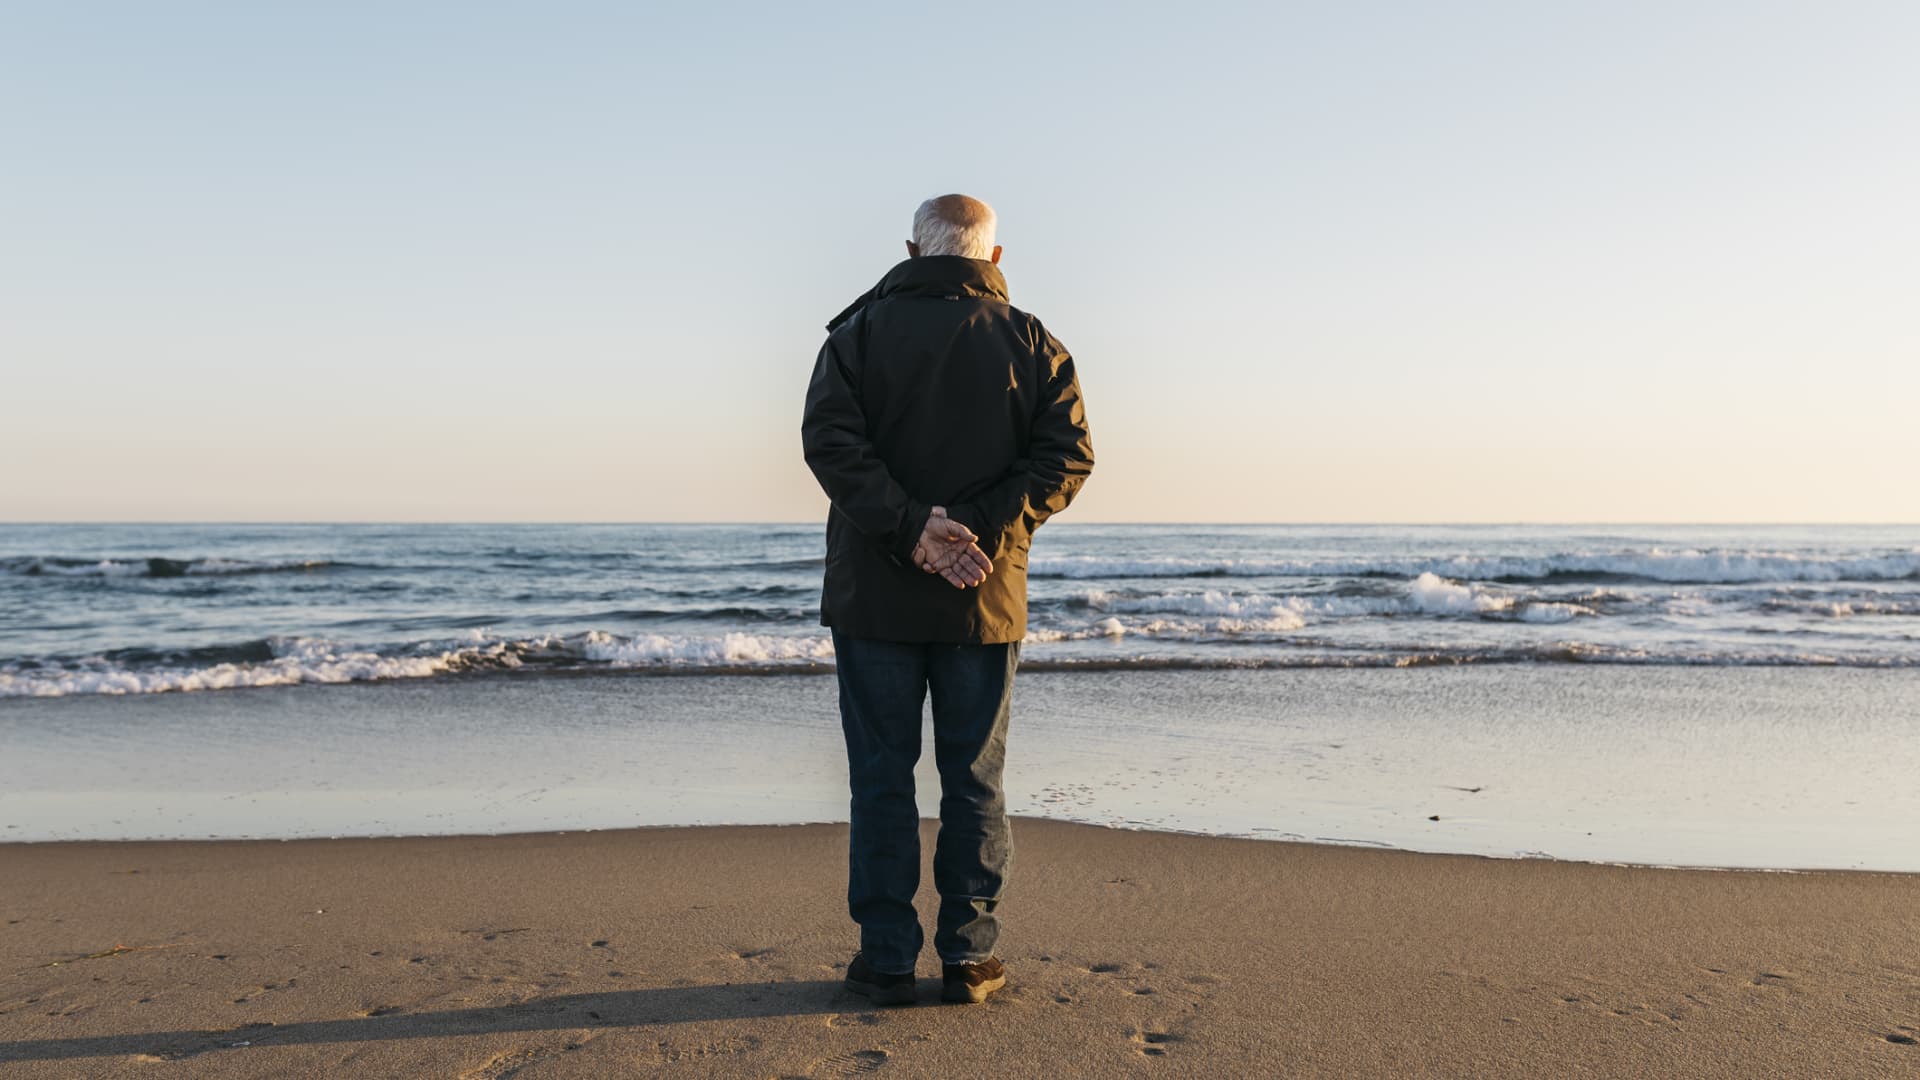 47% of Americans say achieving retirement security will take a miracle